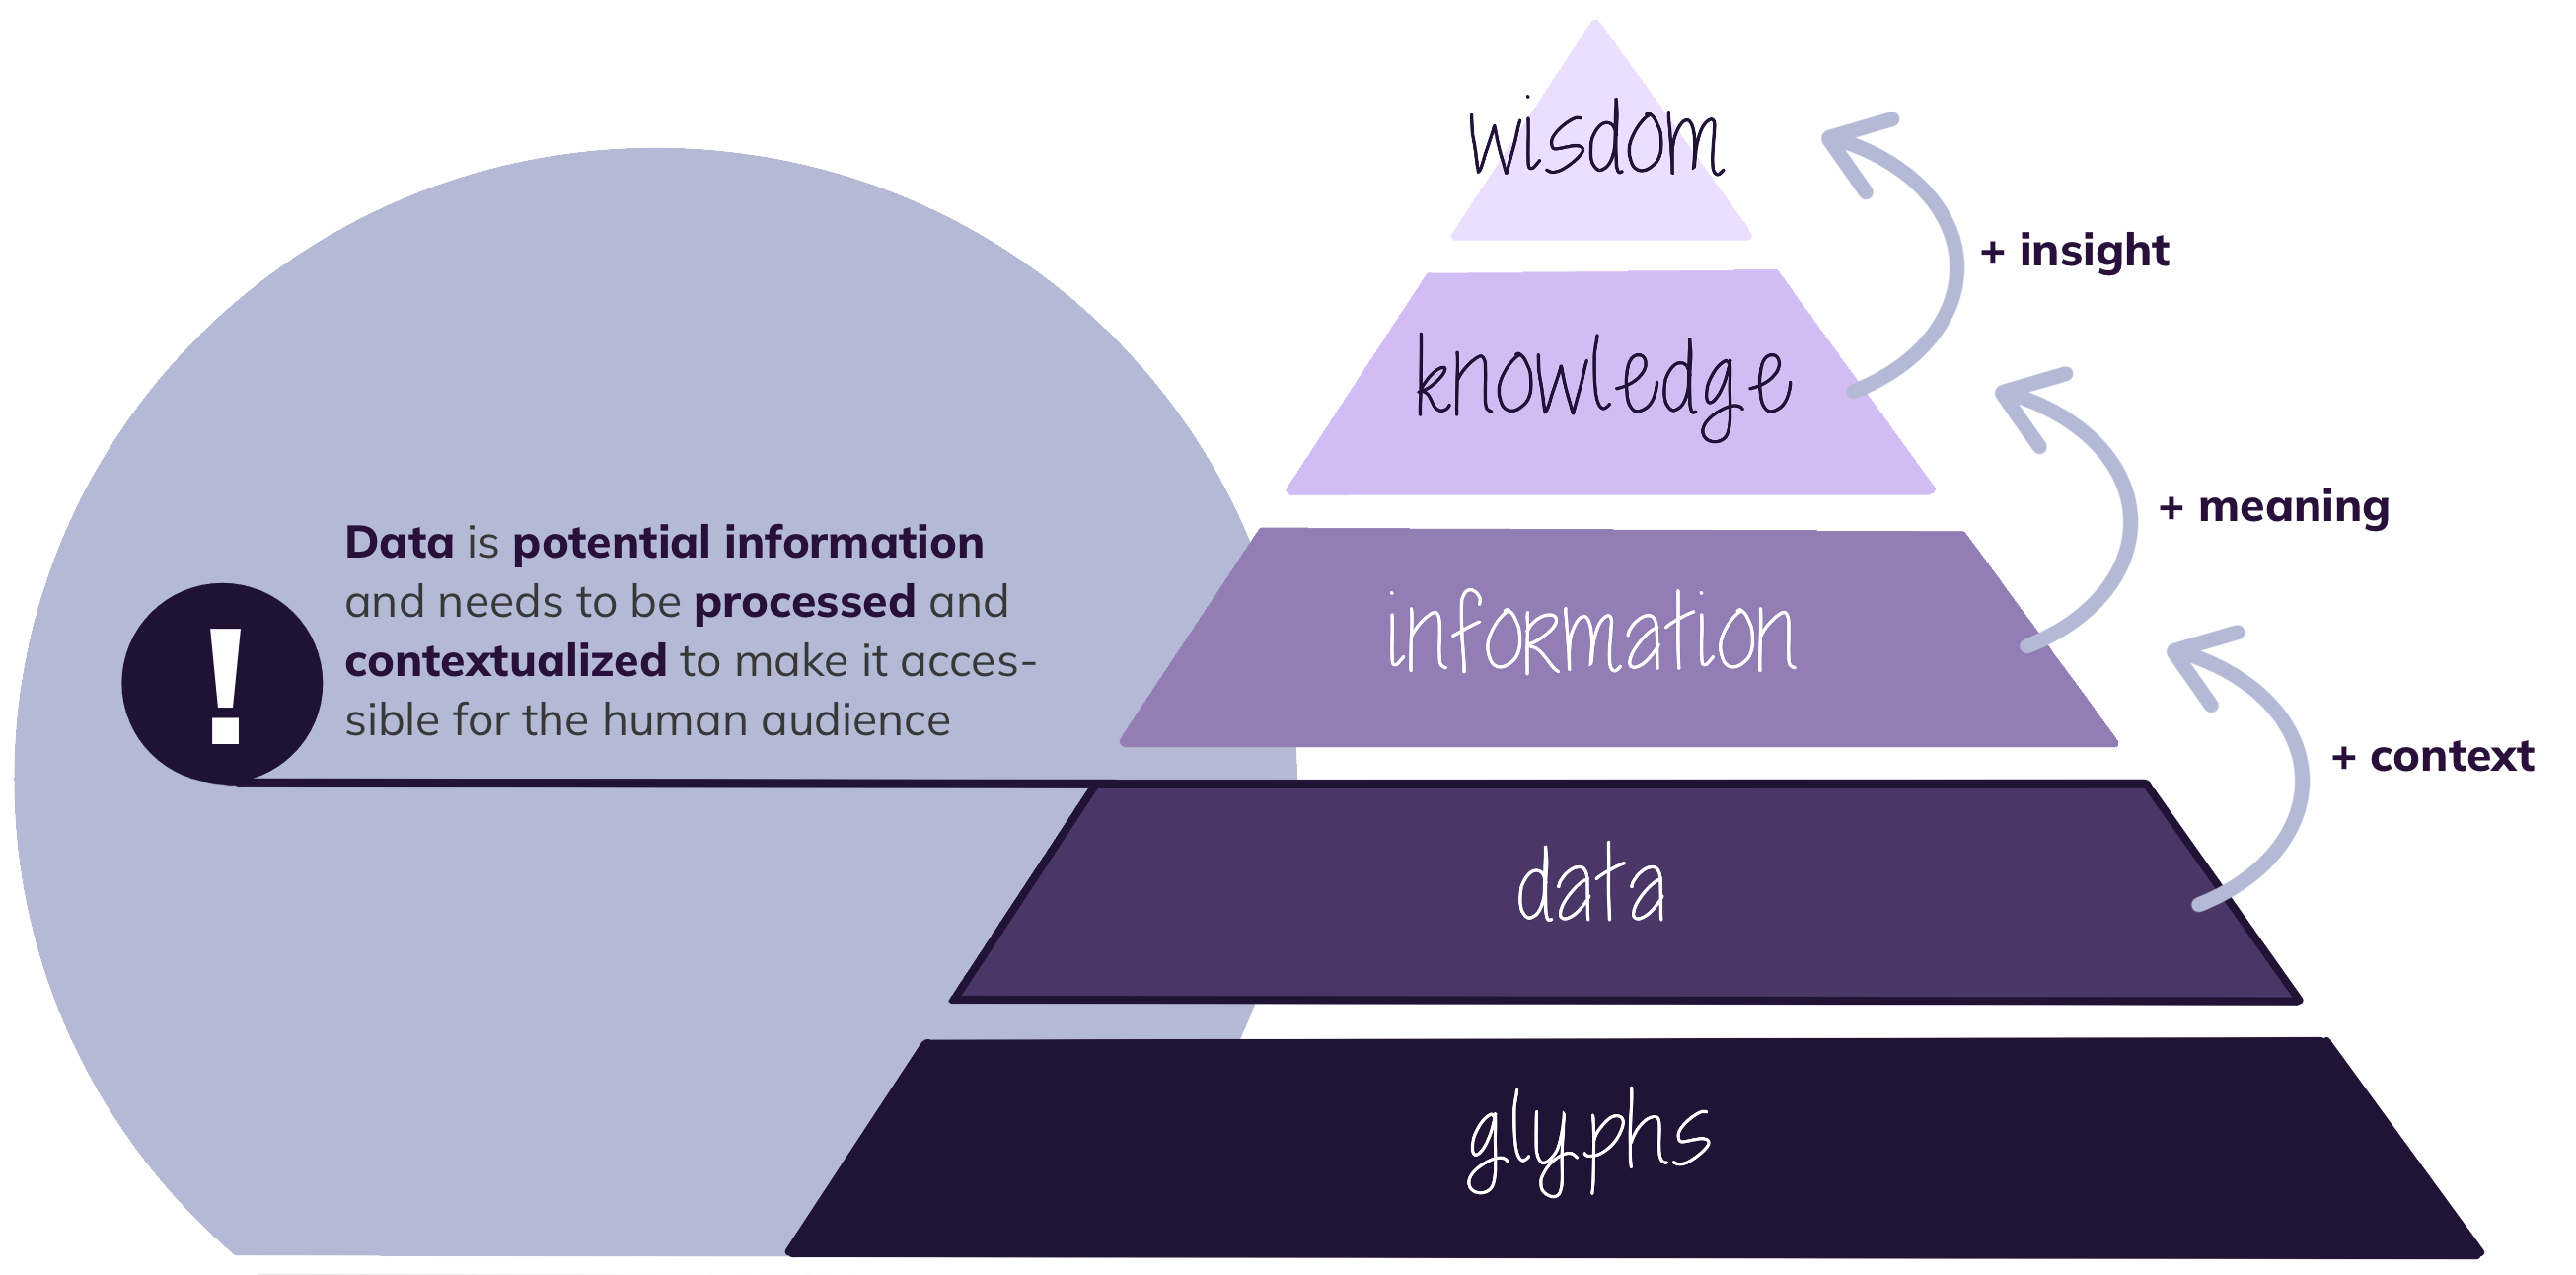 Information pyramid from glyphs to wisdom highlighting the data fracture. Text reads: Data is potential information and needs to be processed and contextualized to make it accessible for the human audience.